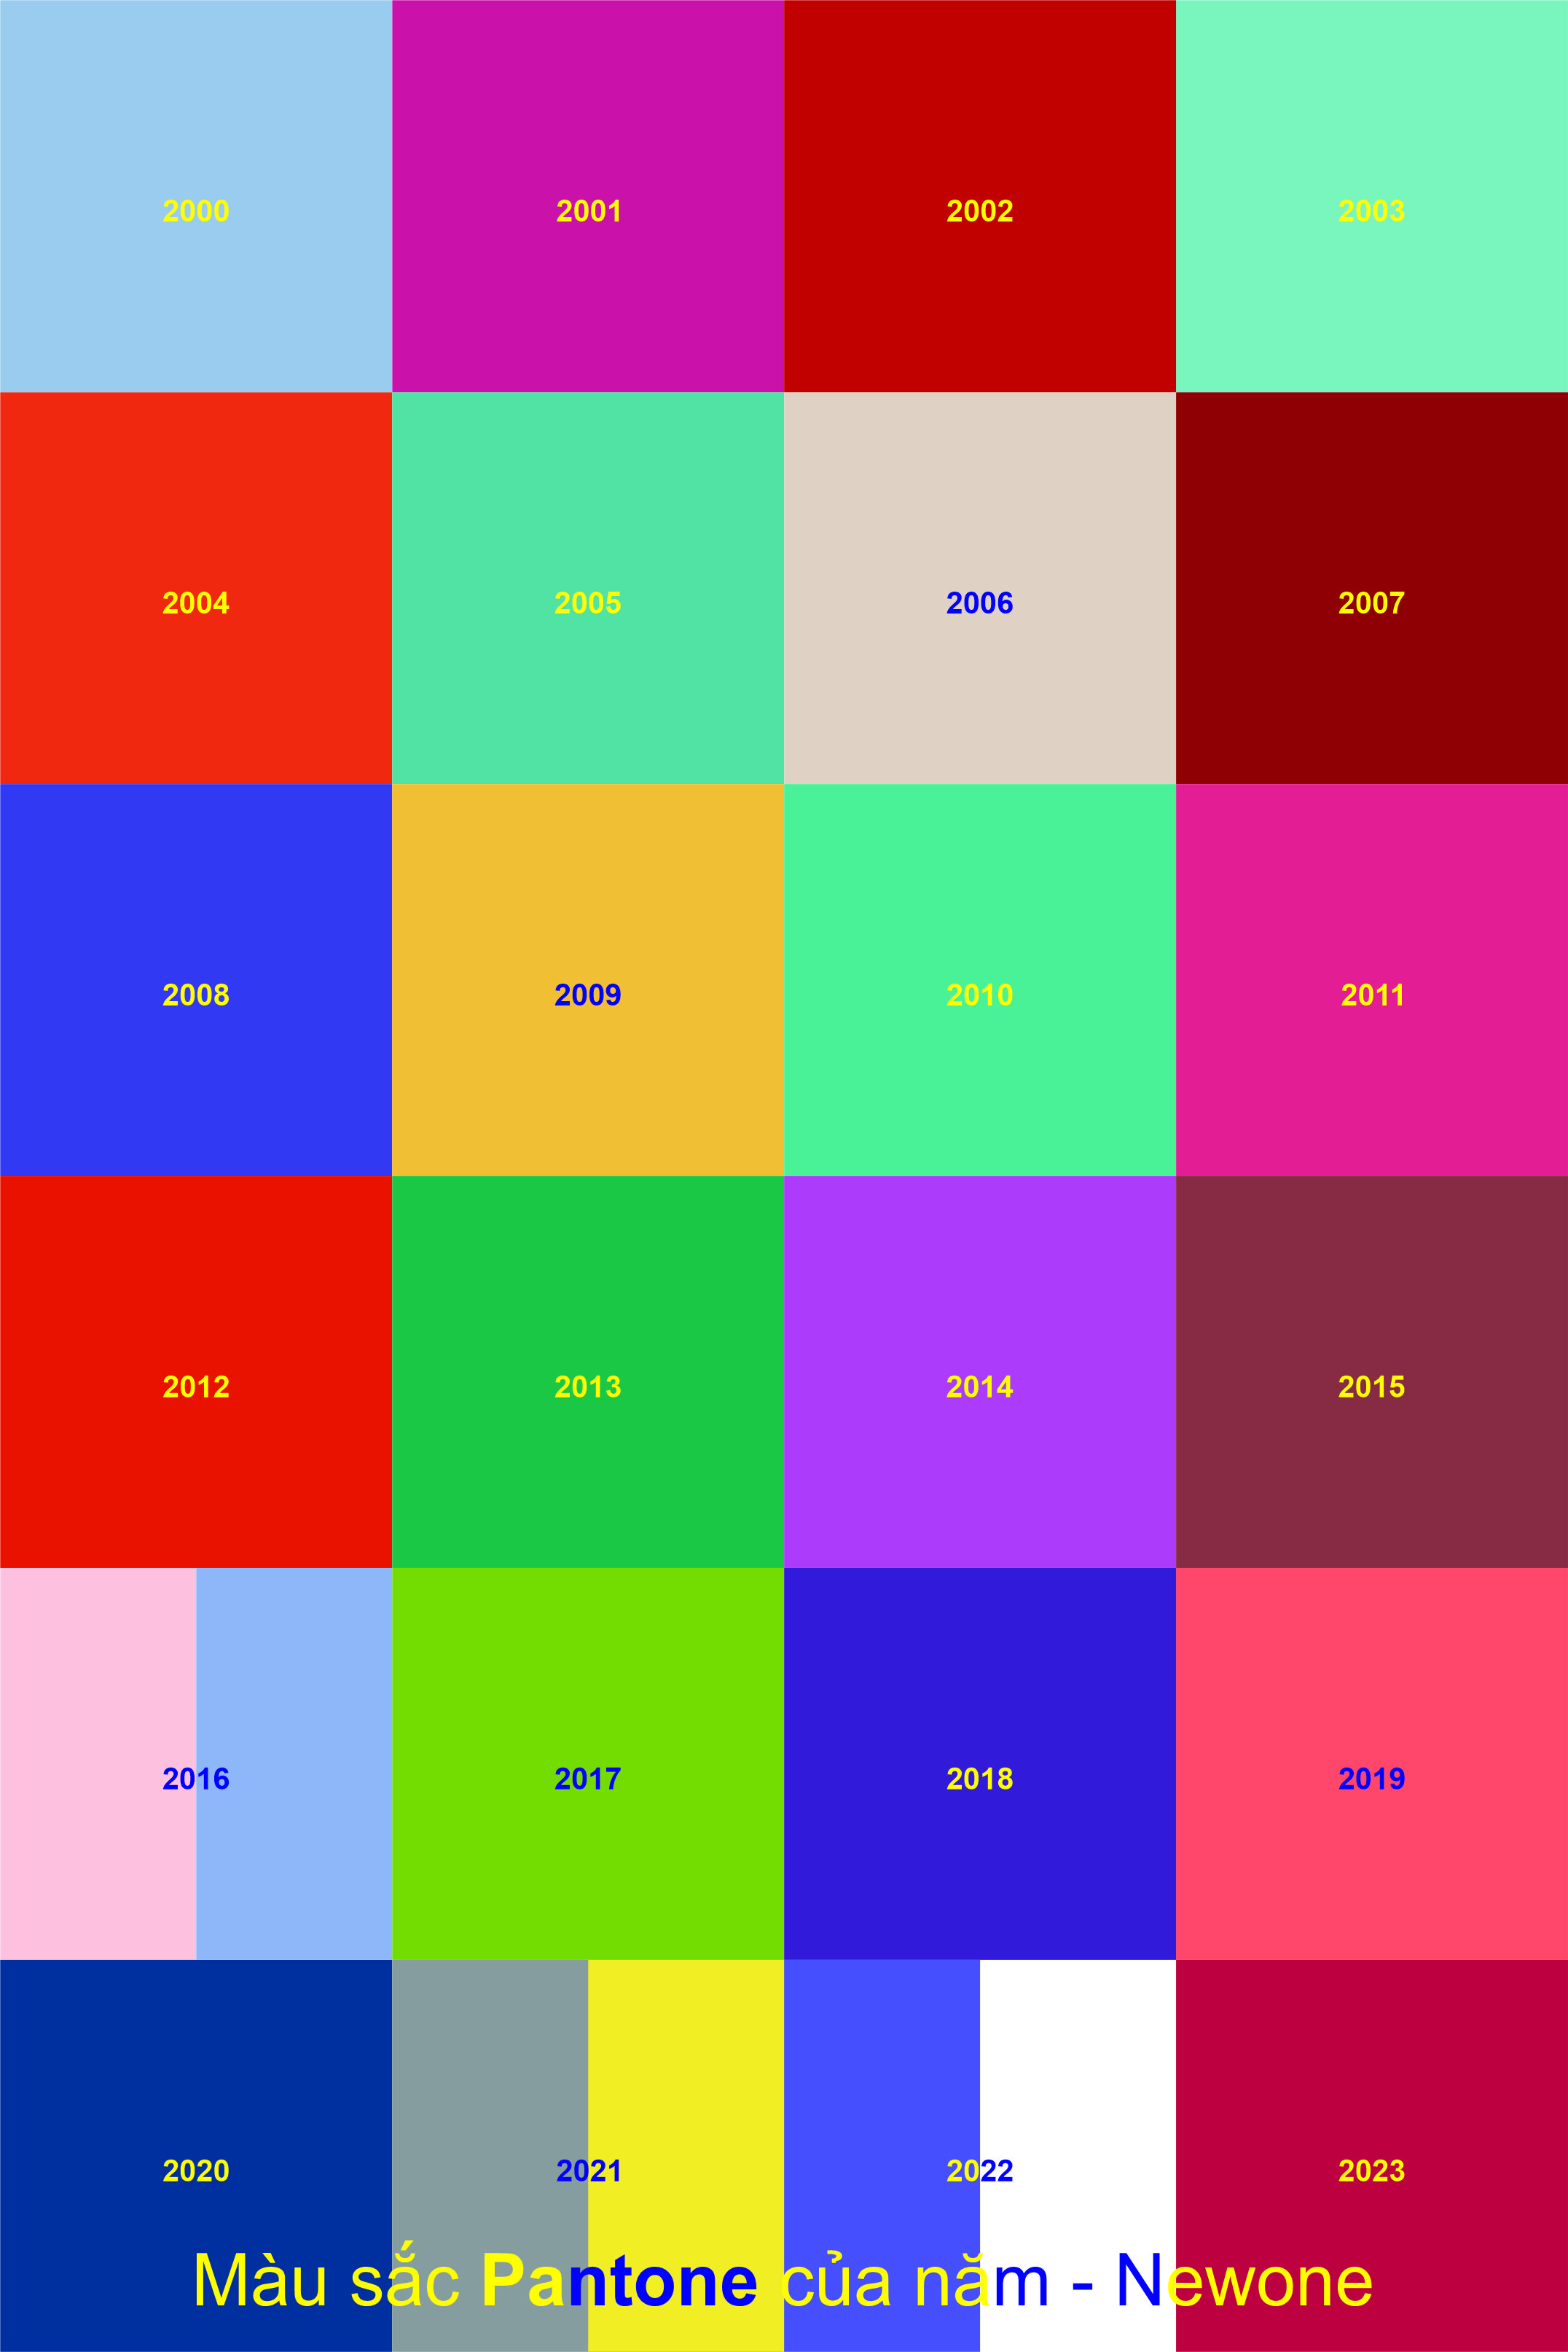 Pantone Colour of the Year 2023